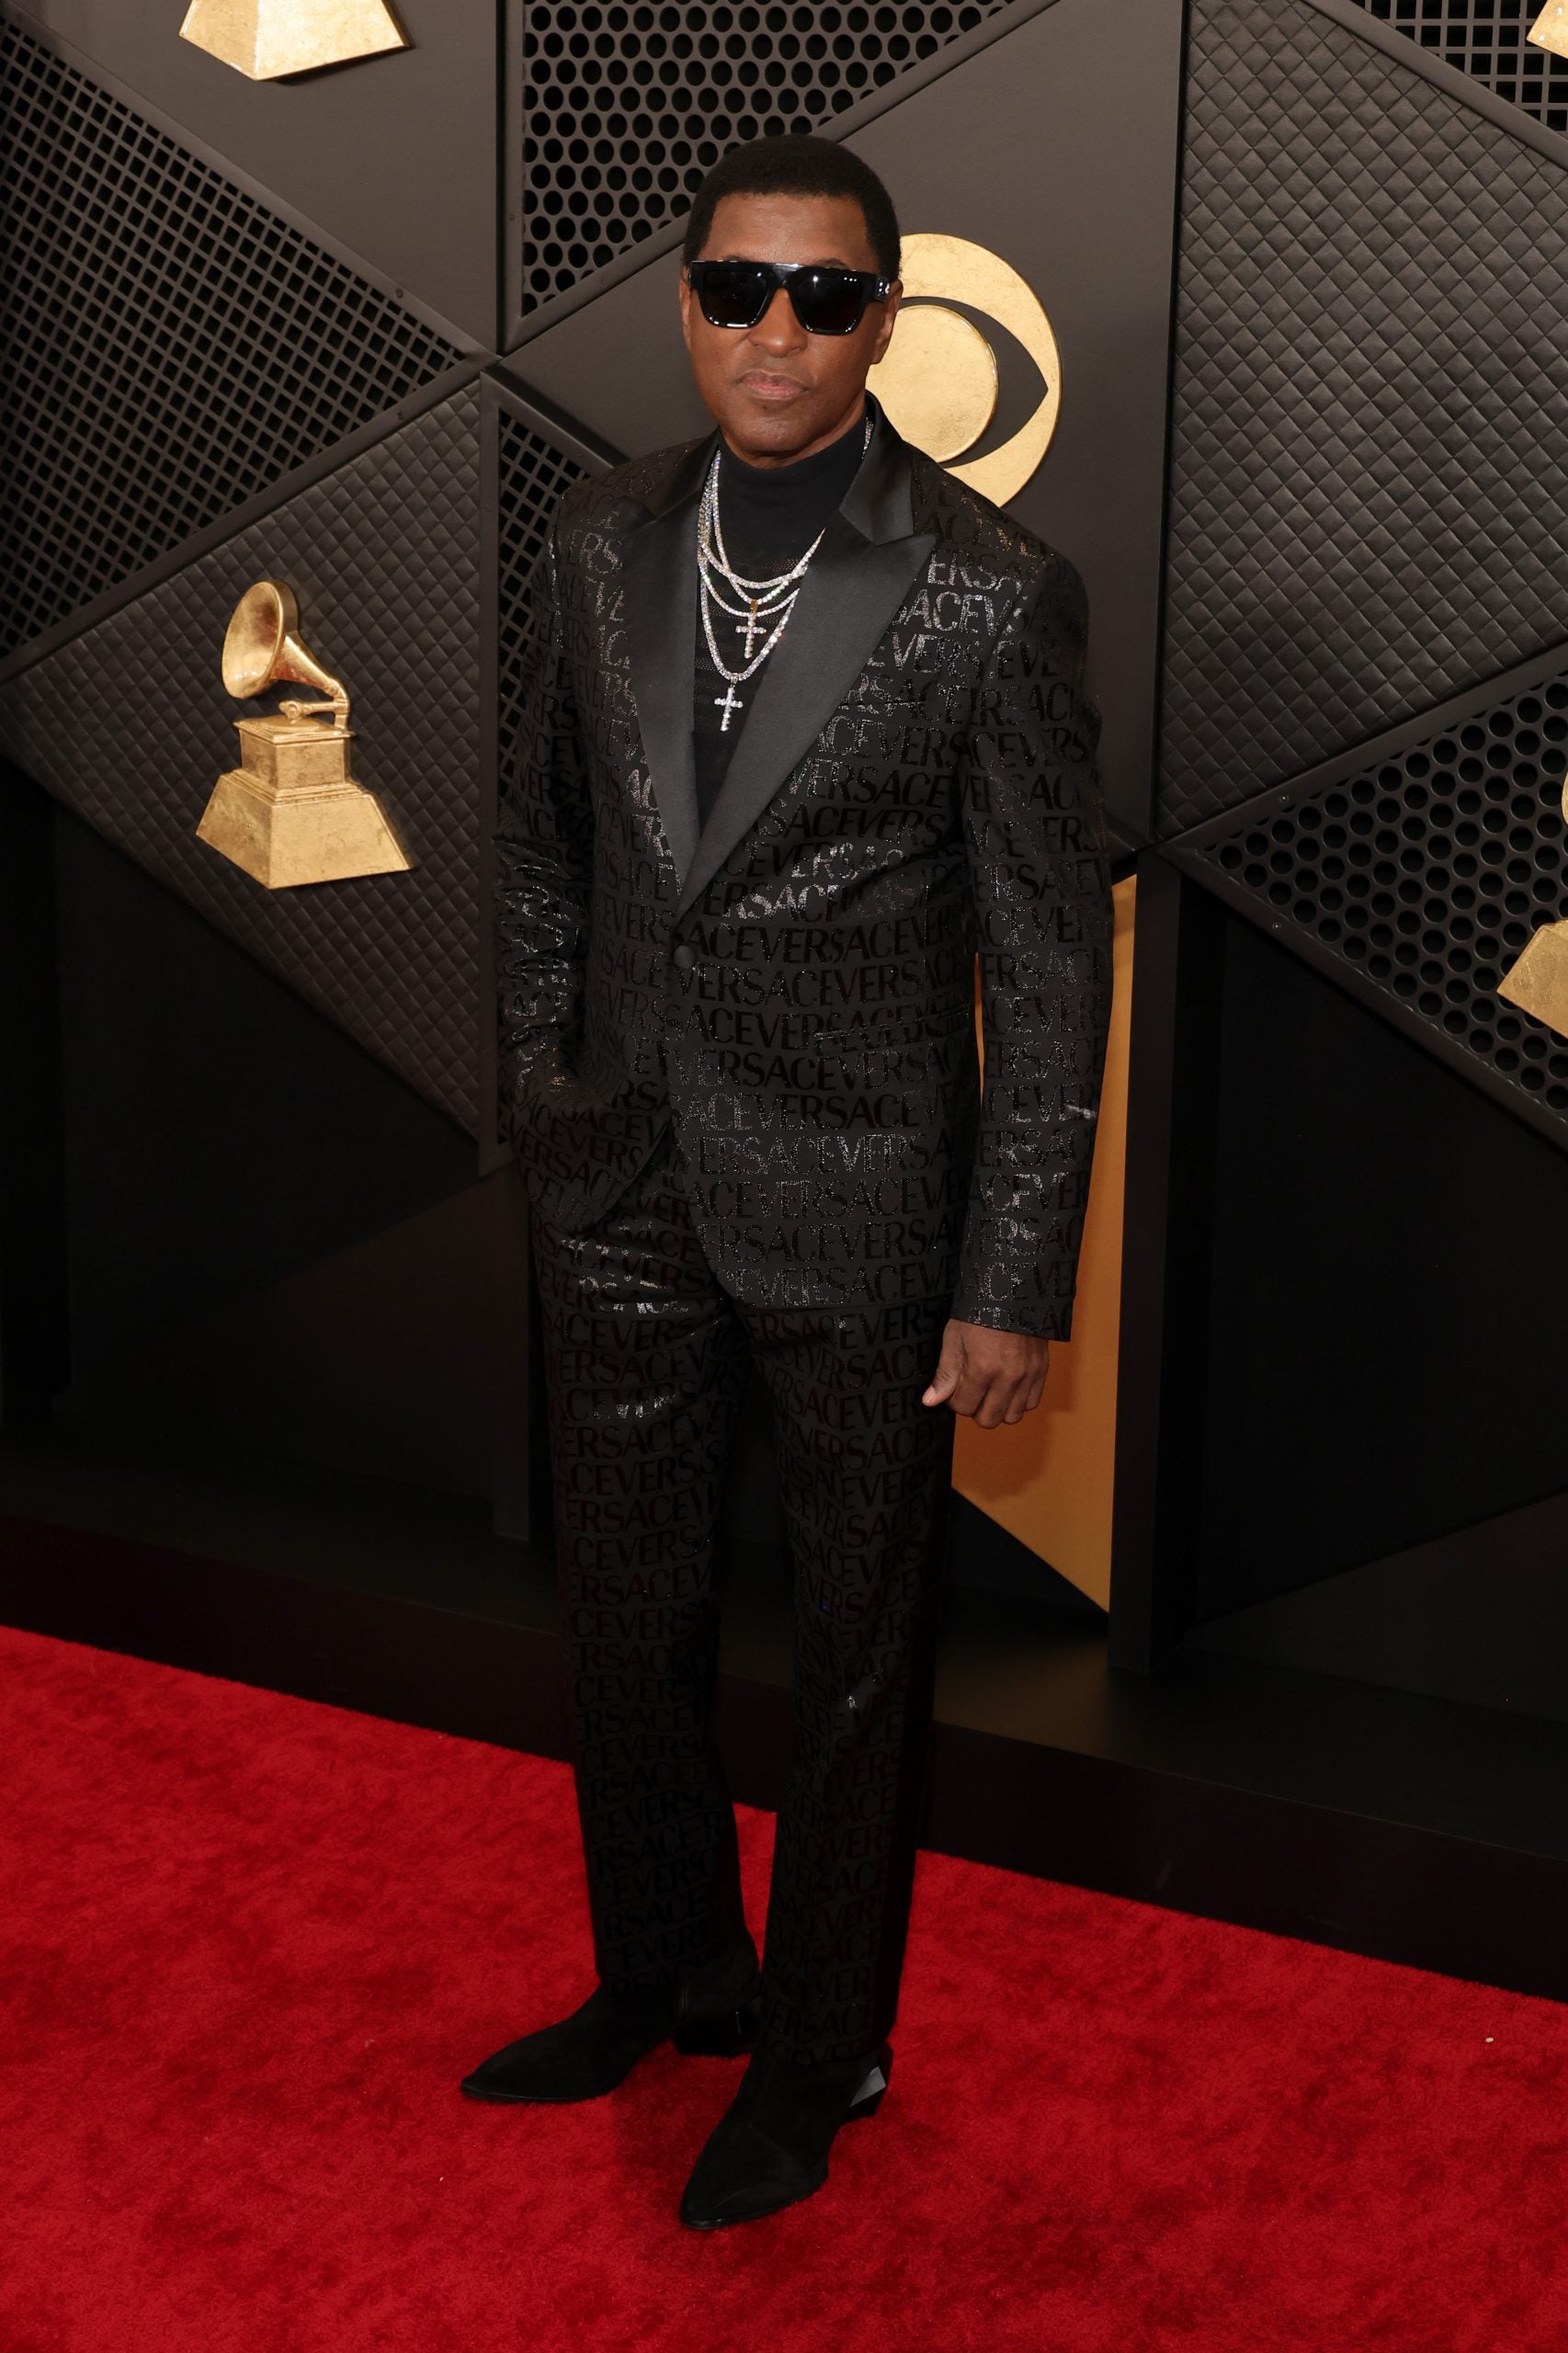 The Best Looks At The 66th Annual Grammy Awards